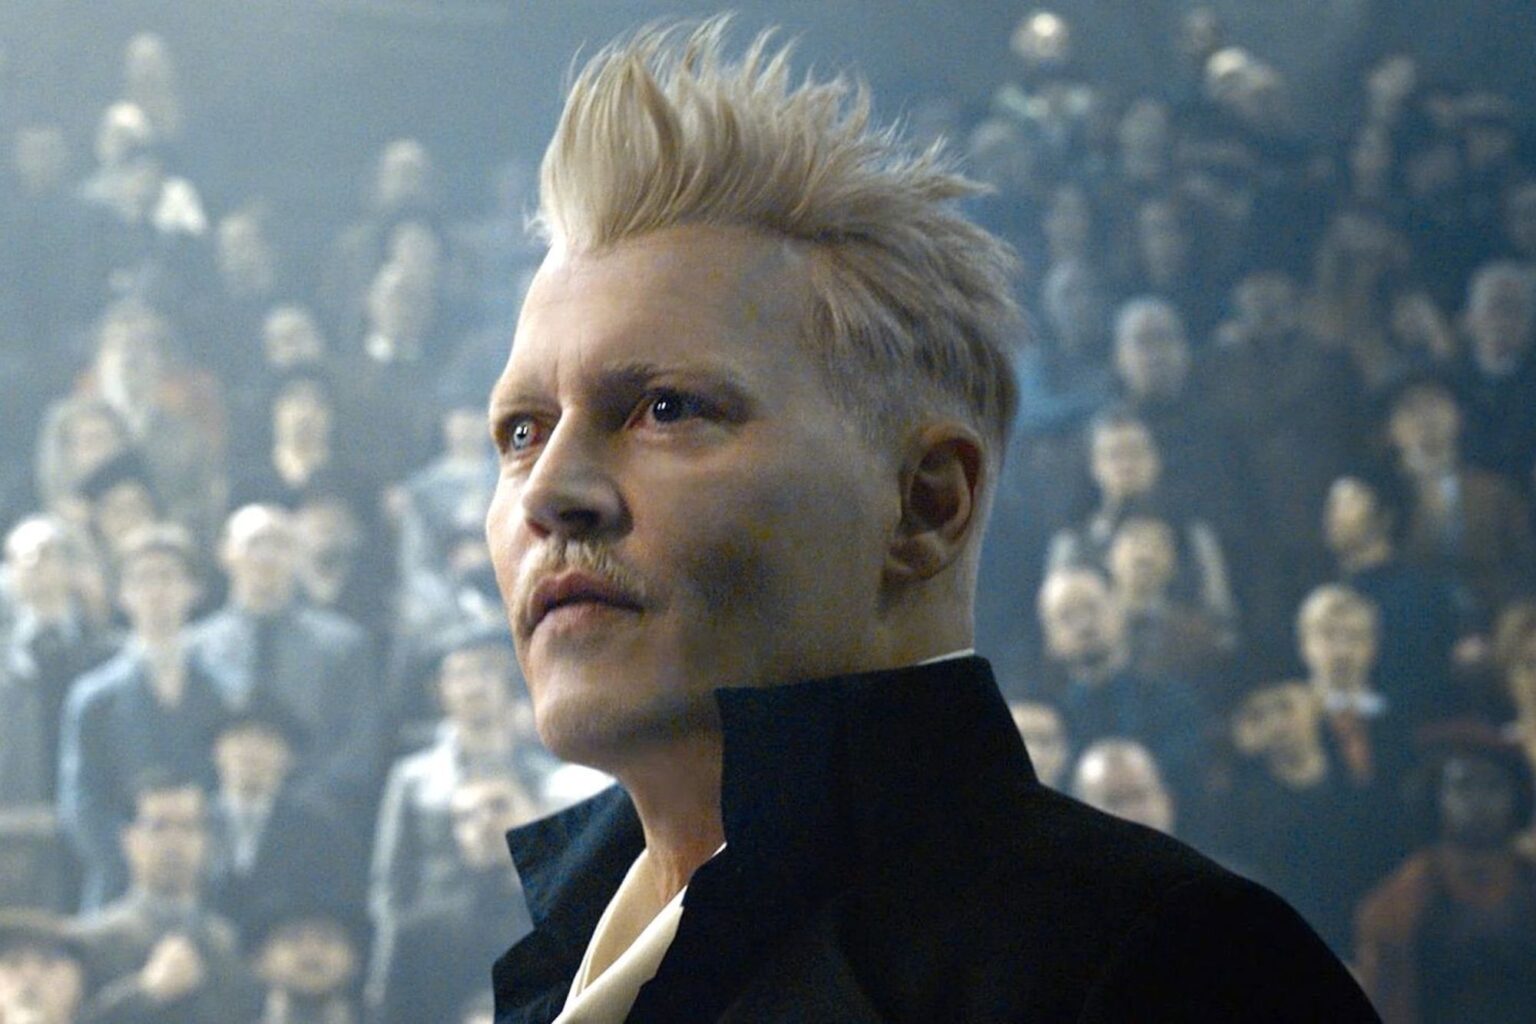 The ‘Fantastic Beasts’ cast has undergone huge changes. Find out who will replace Johnny Depp as the main villain.